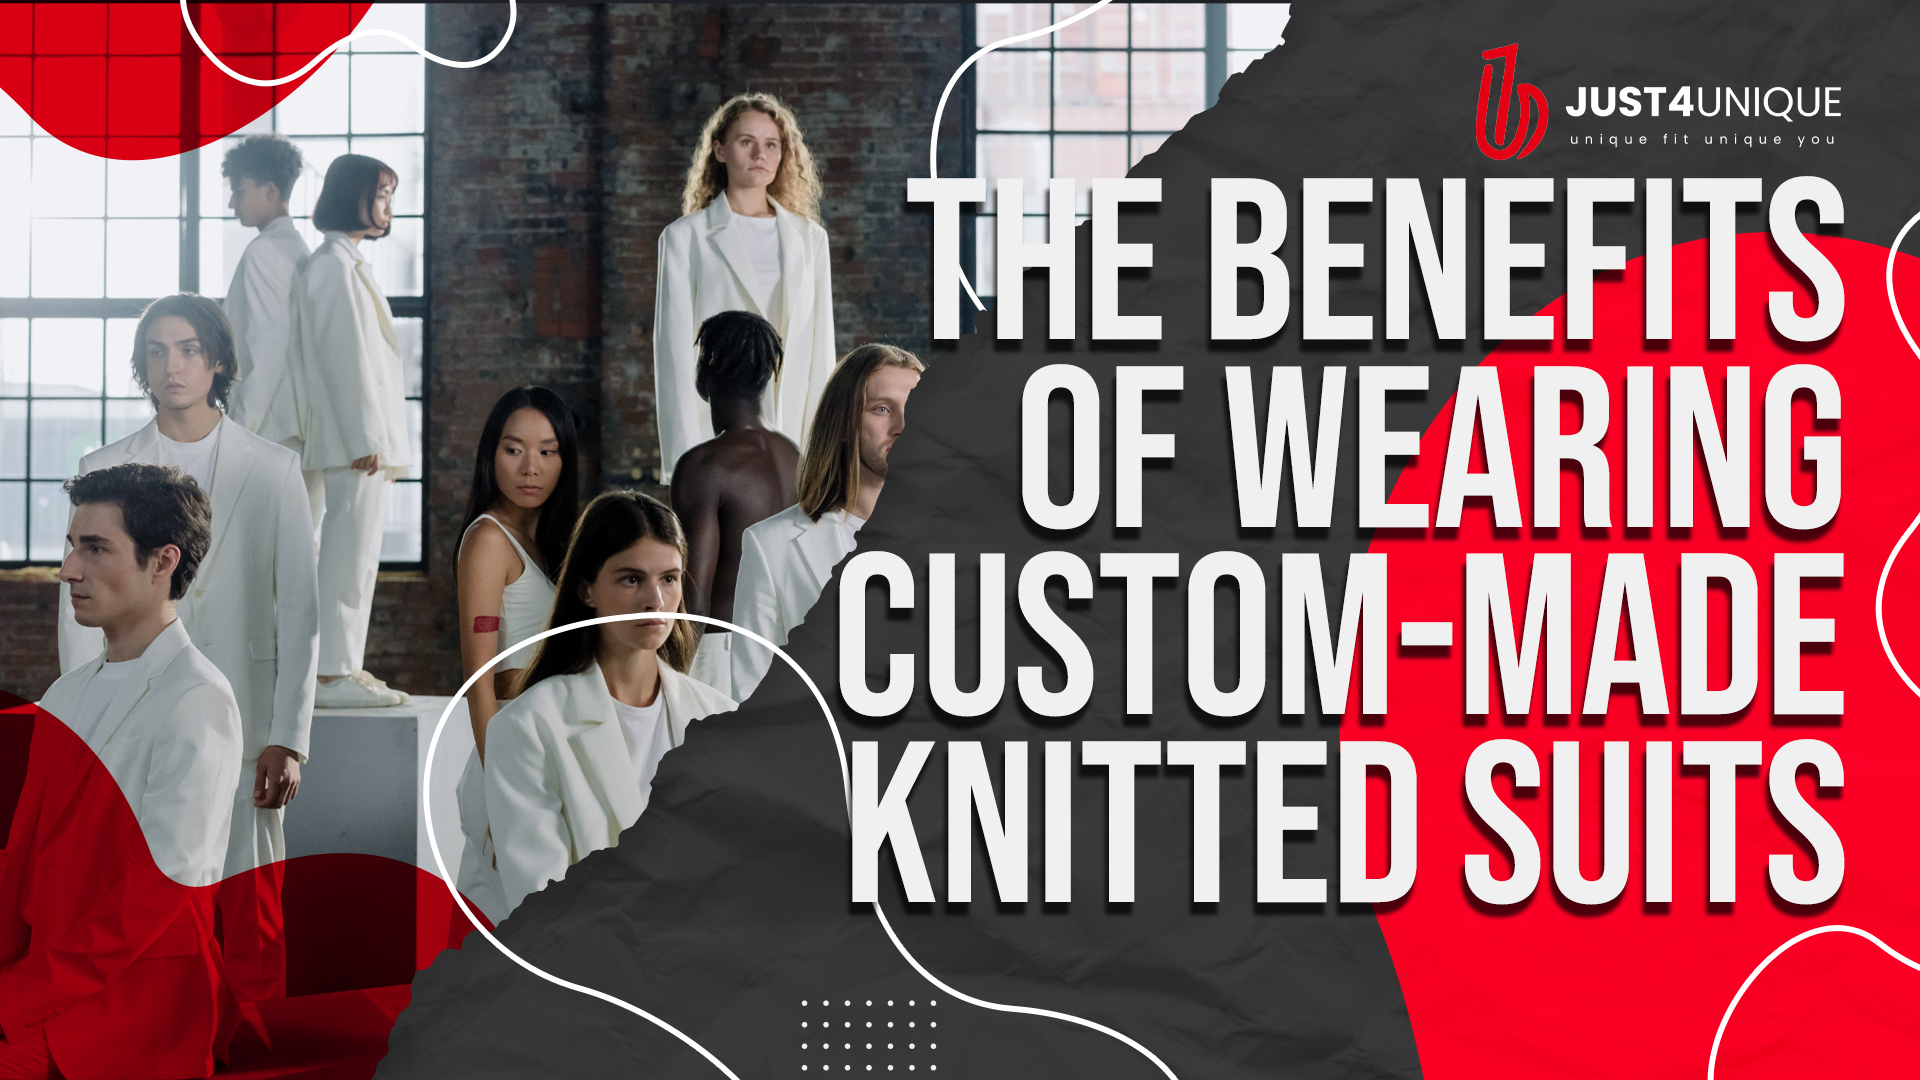 The Benefits of Wearing Custom-Made Knitted Suits